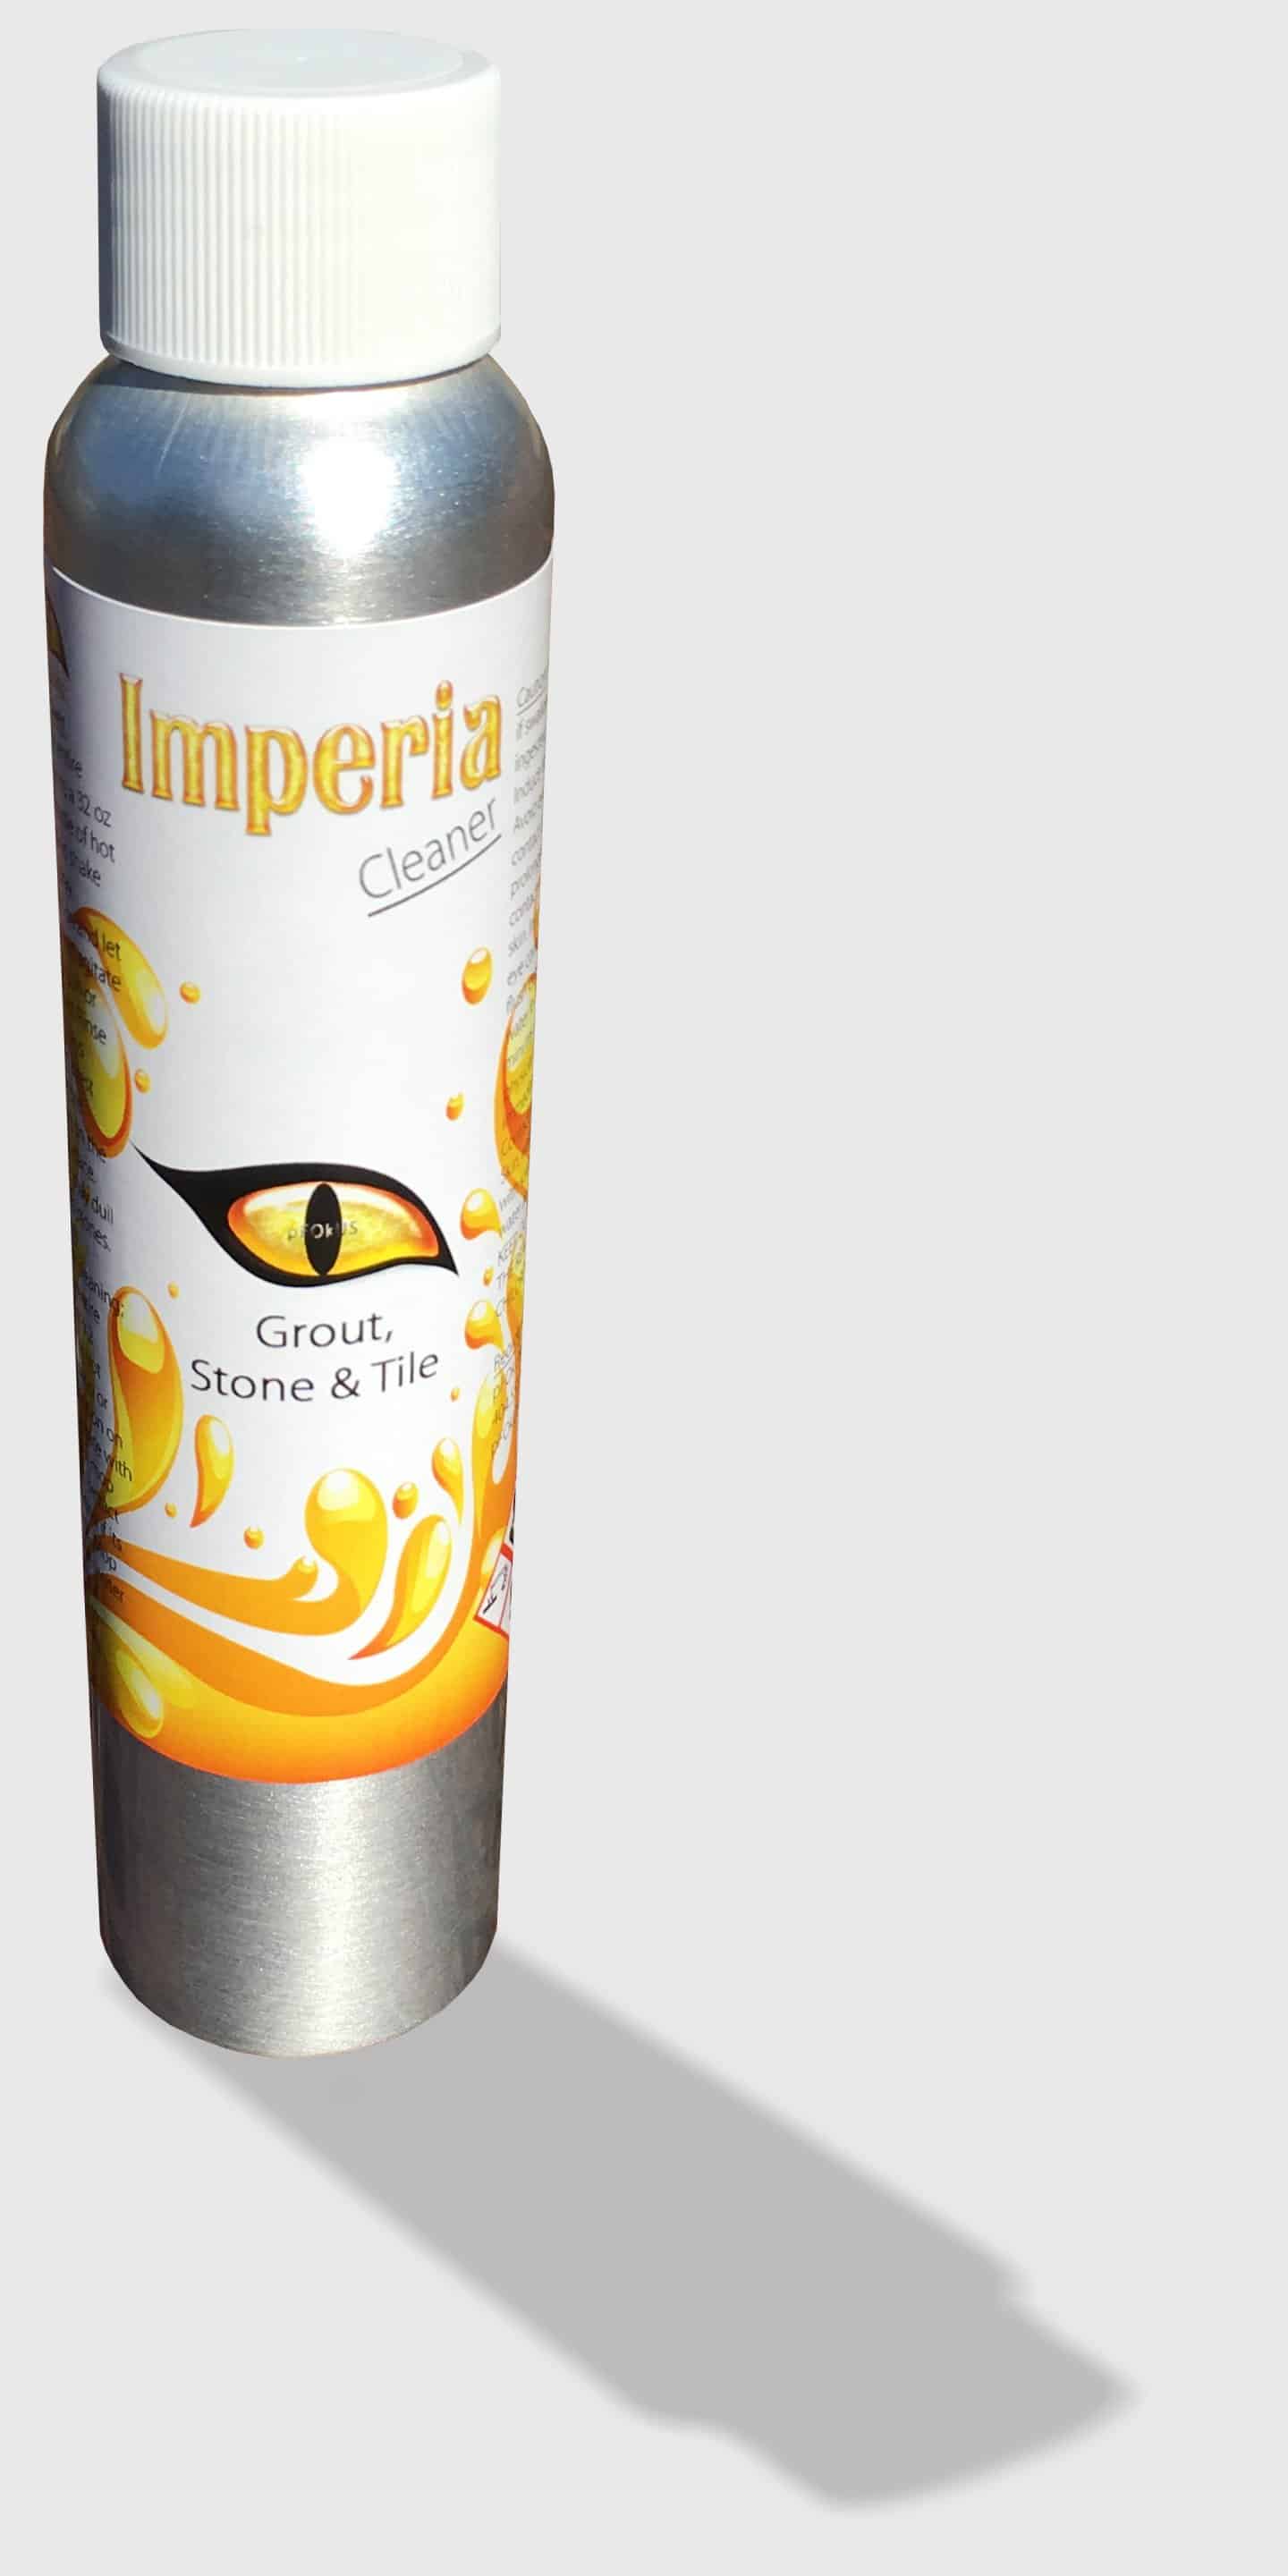 Imperia - Tile and Grout Cleaner